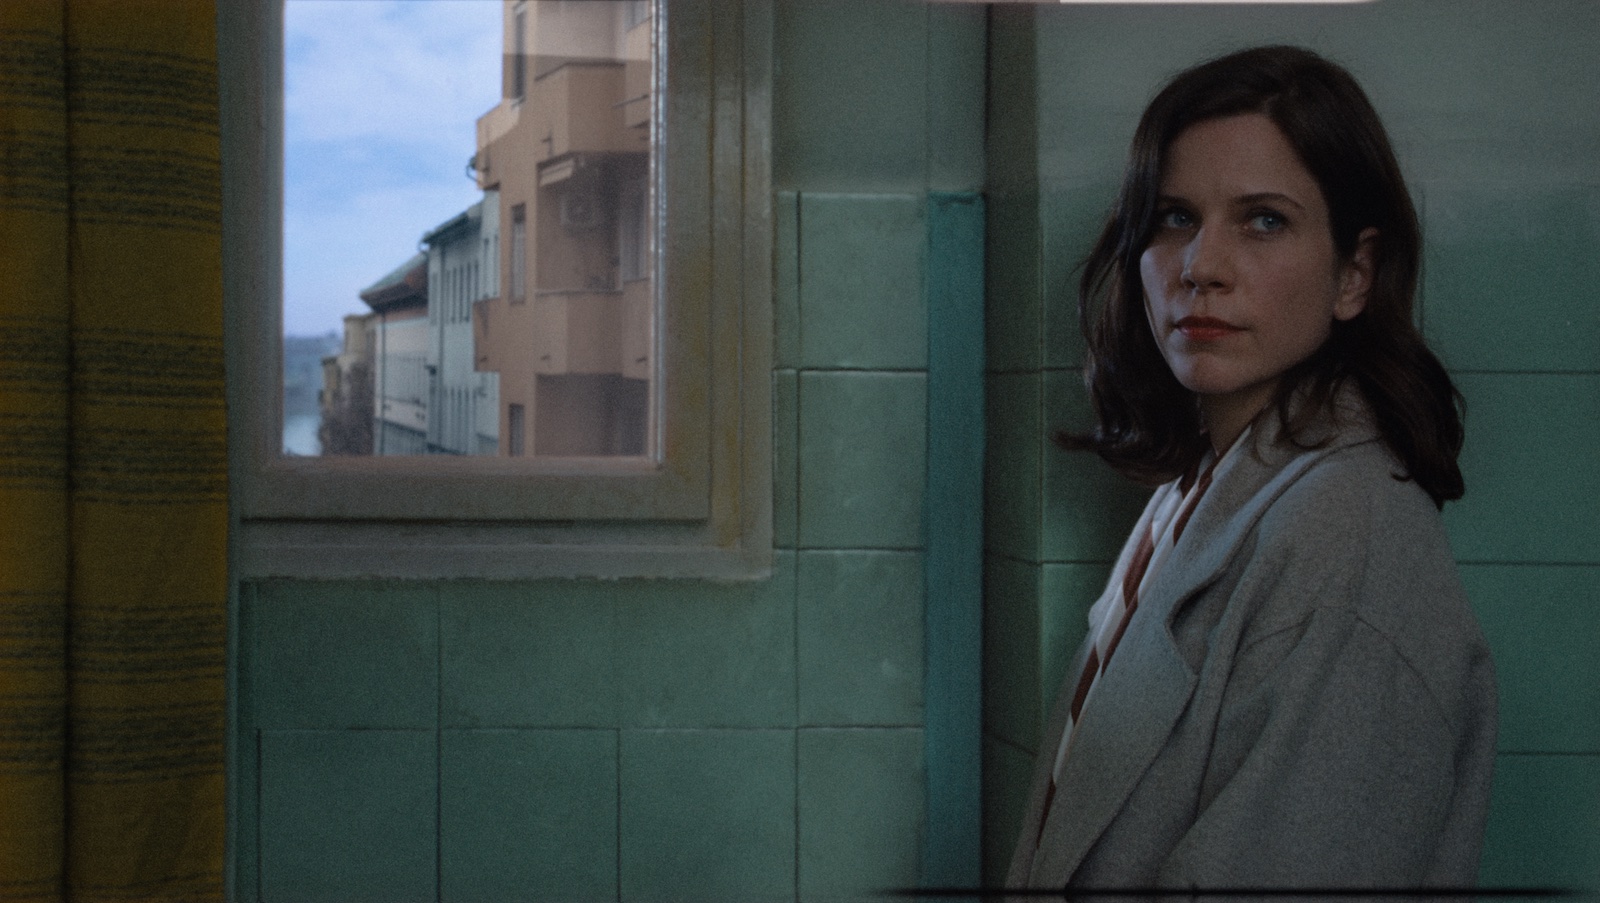 A woman with long dark hair looks at the camera standing next to a window looking out onto a city.